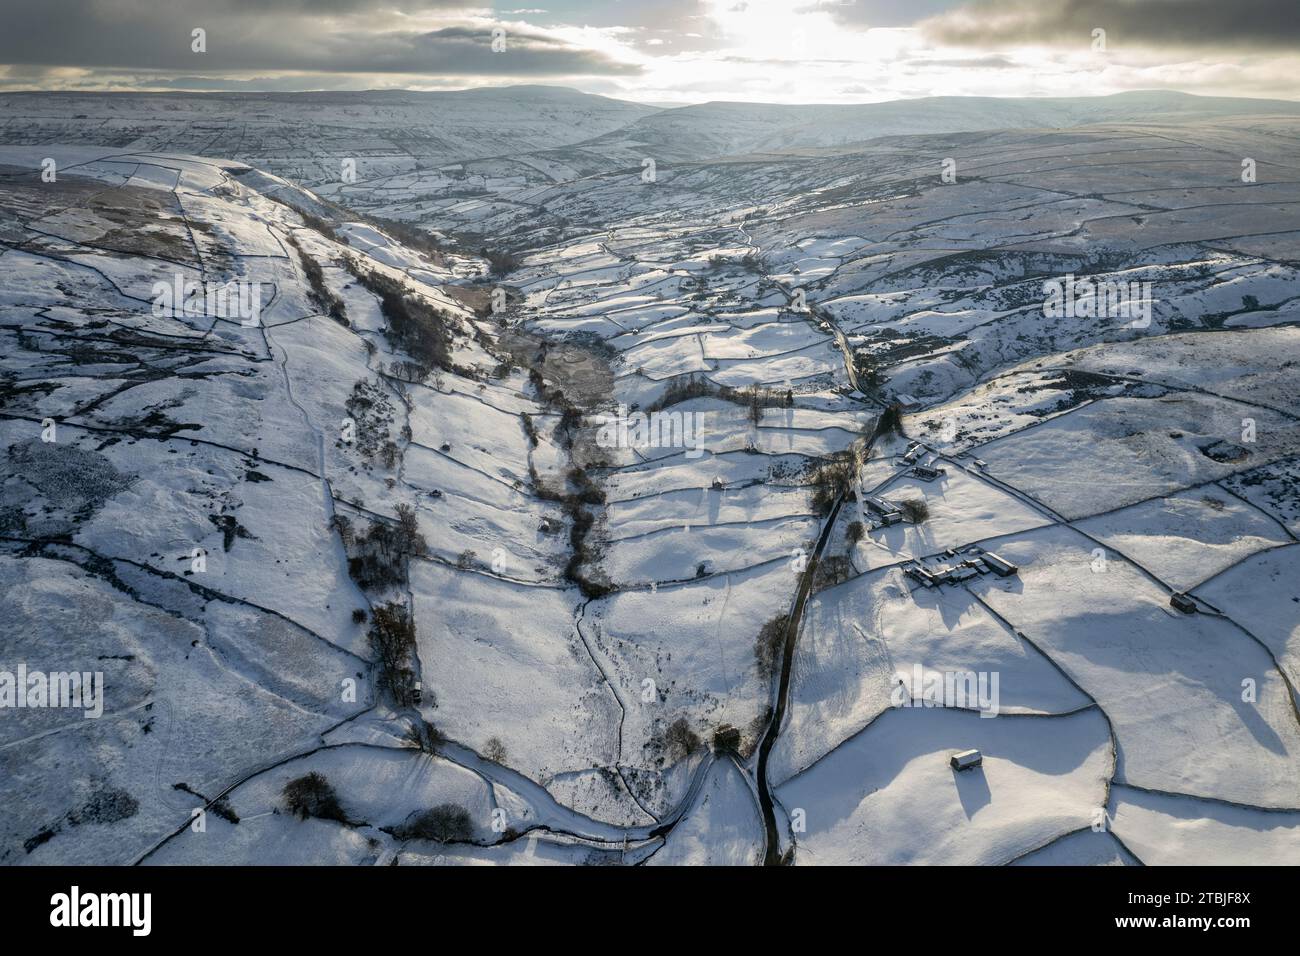 Swaledale, North Yorkshire, UK, 30th Nov 2023 - Weather. A coating of snow covers the farmland in the upper reaches of Swaledale near the isolated ham Stock Photo